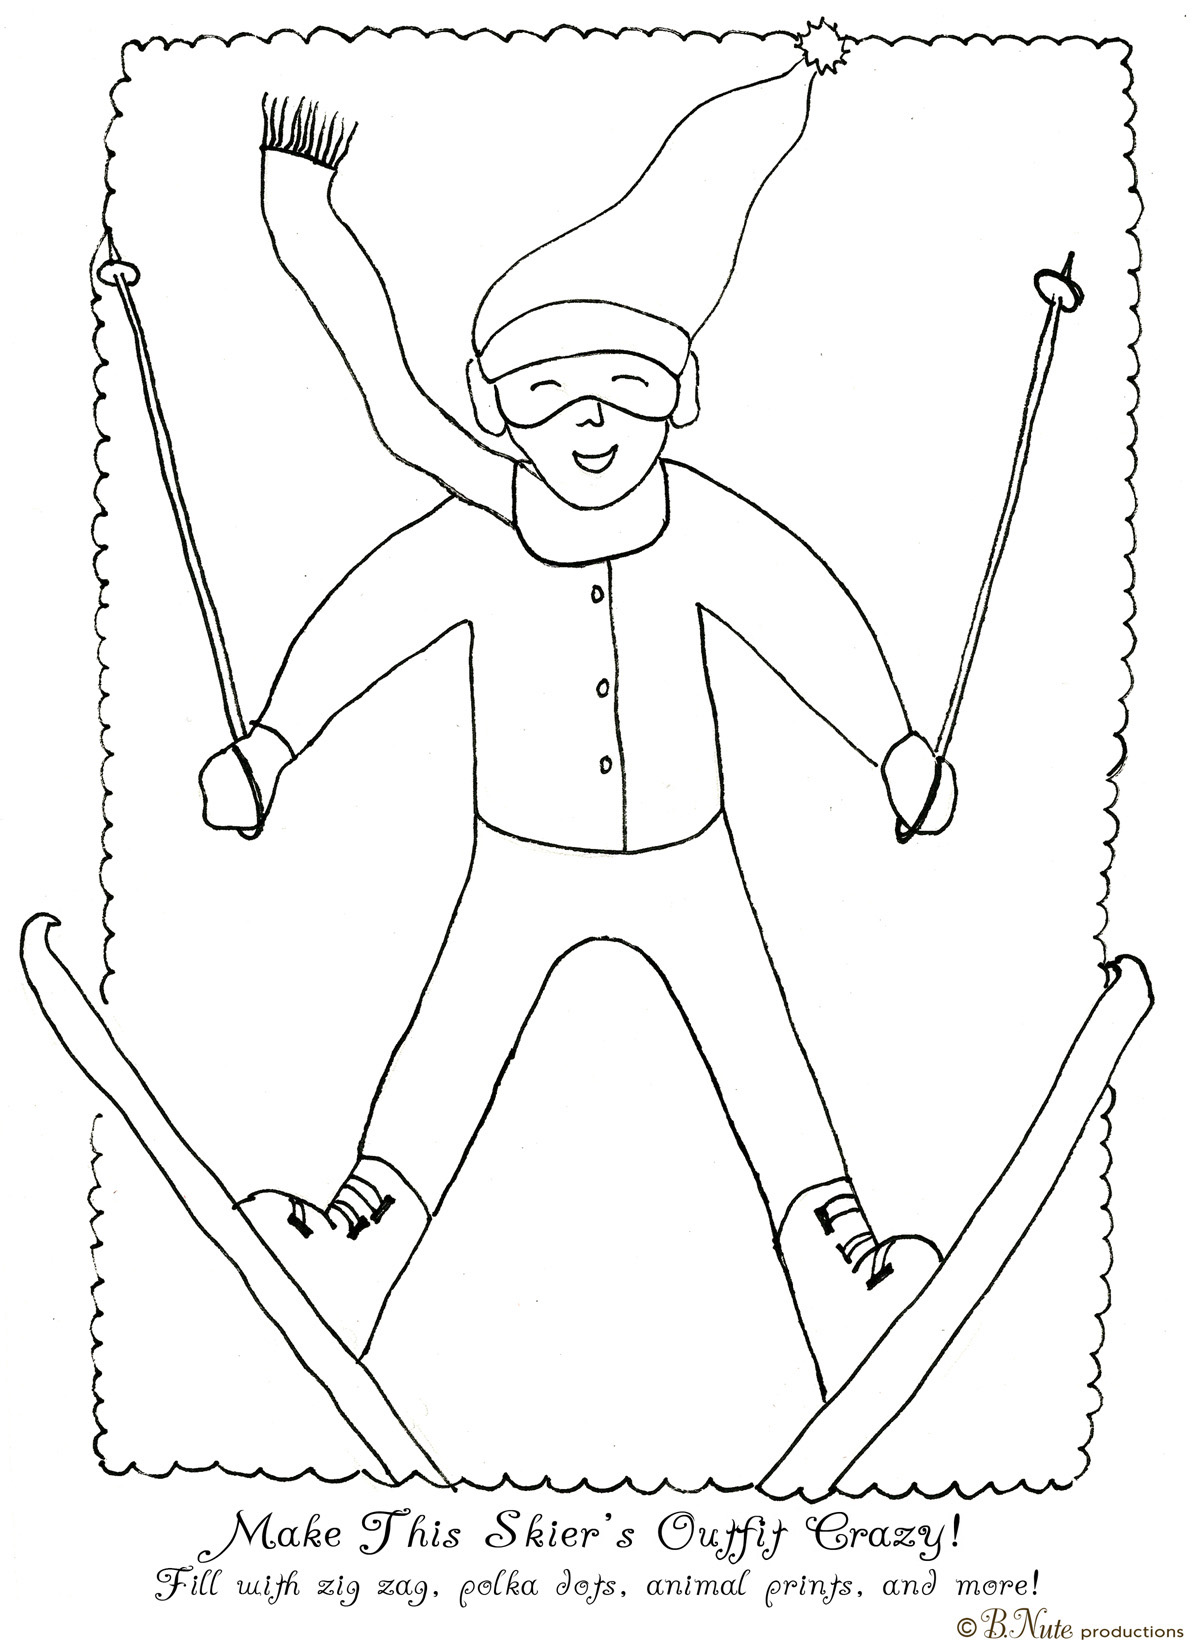 bnute productions: Free Printable Skier Coloring Page